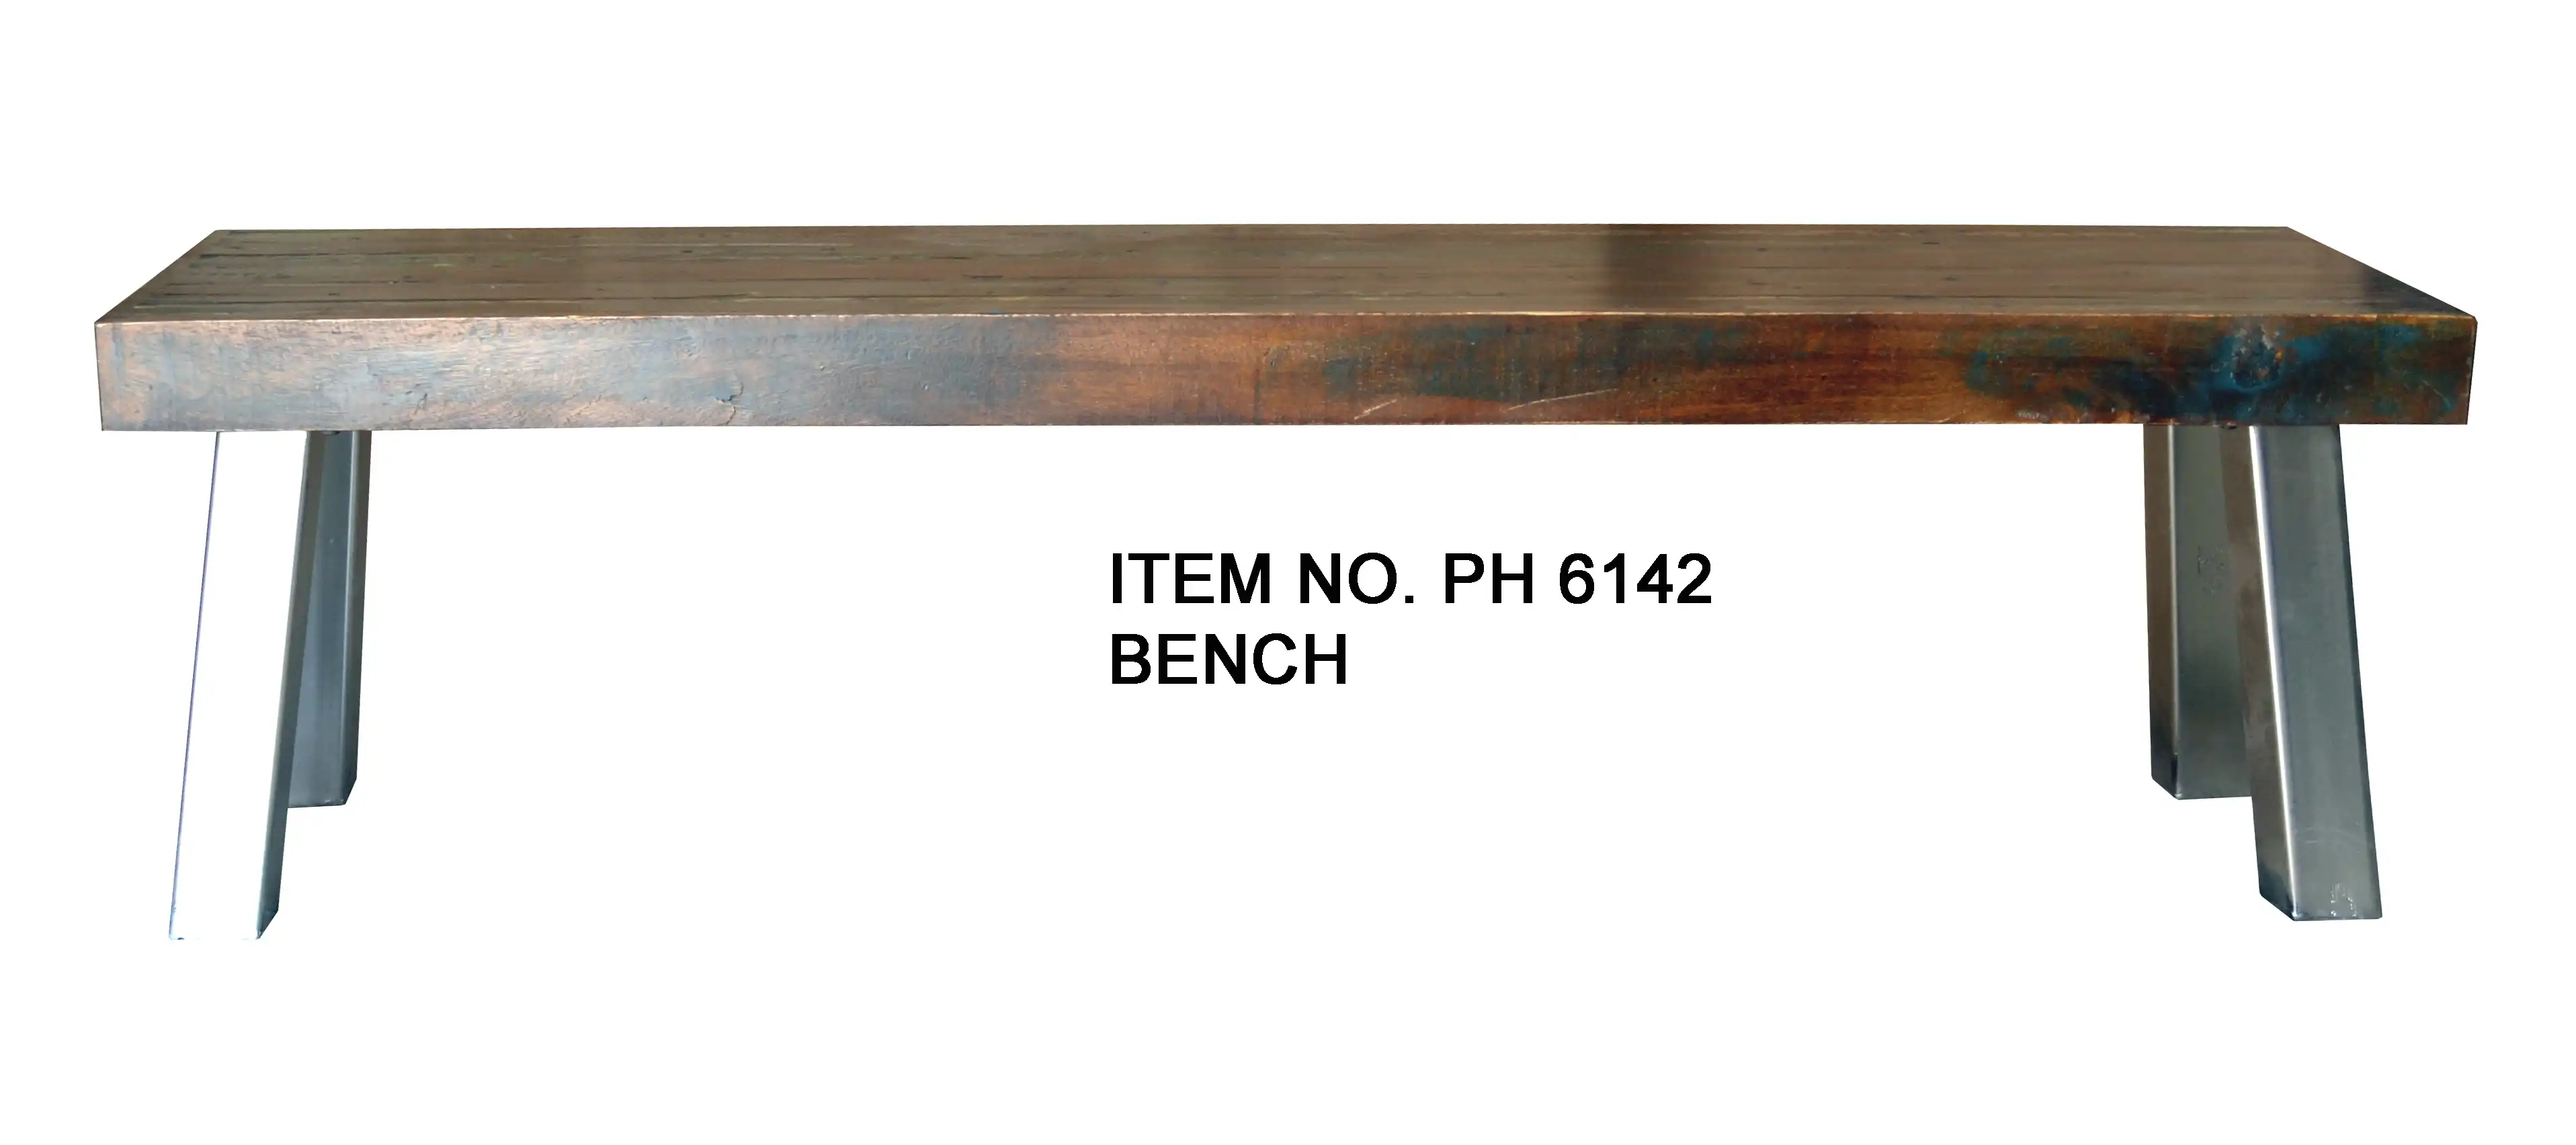 Reclaimed Wood Bench Table with Leg Iron (KD) - popular handicrafts